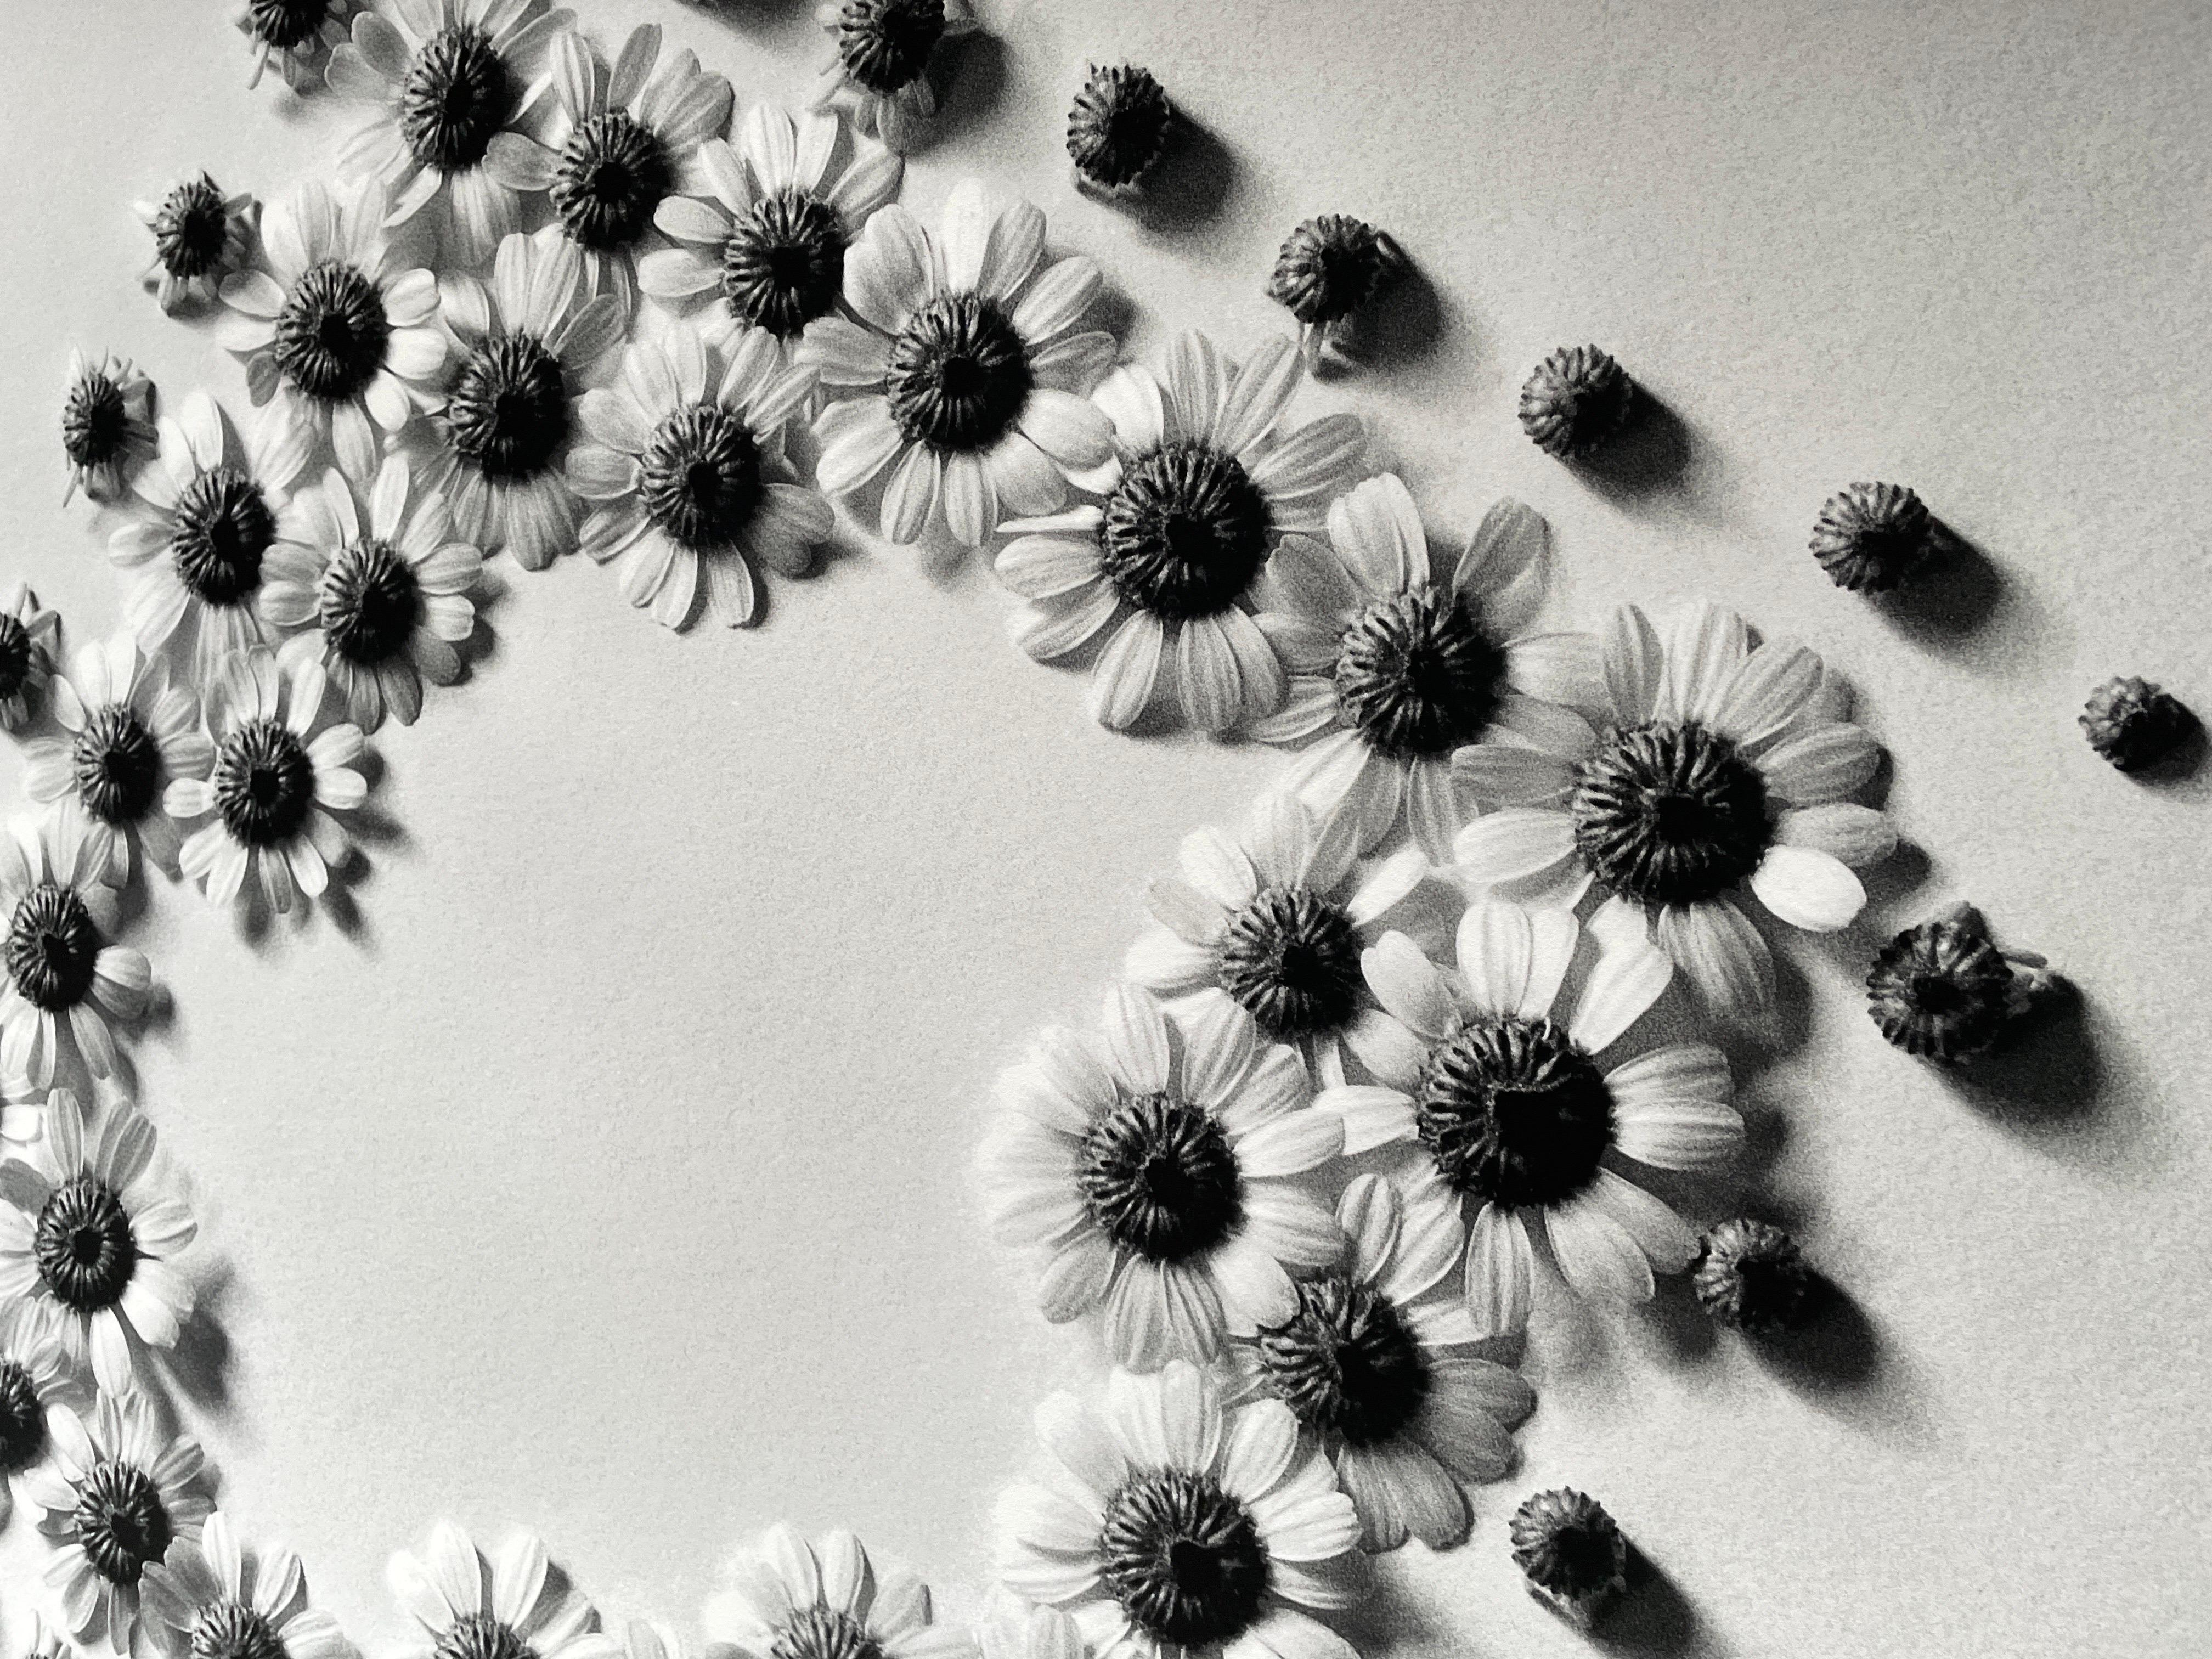 Ramunės - abstract analogue black and white floral photography, 2 of 5 - Photograph by Ugne Pouwell